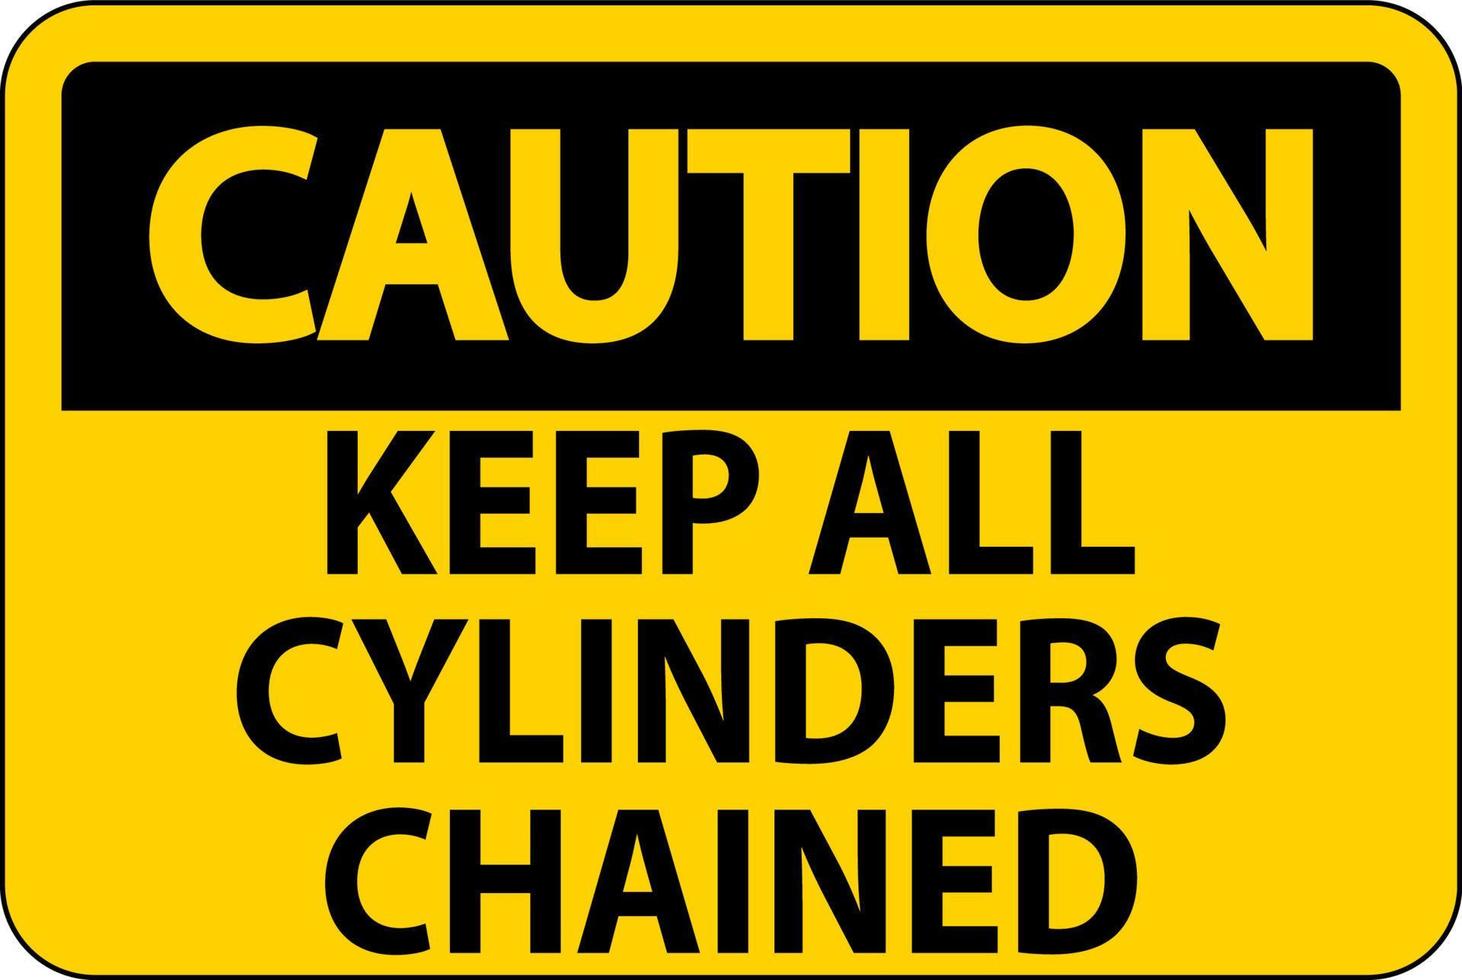 Caution Sign Keep All Cylinders Chained vector